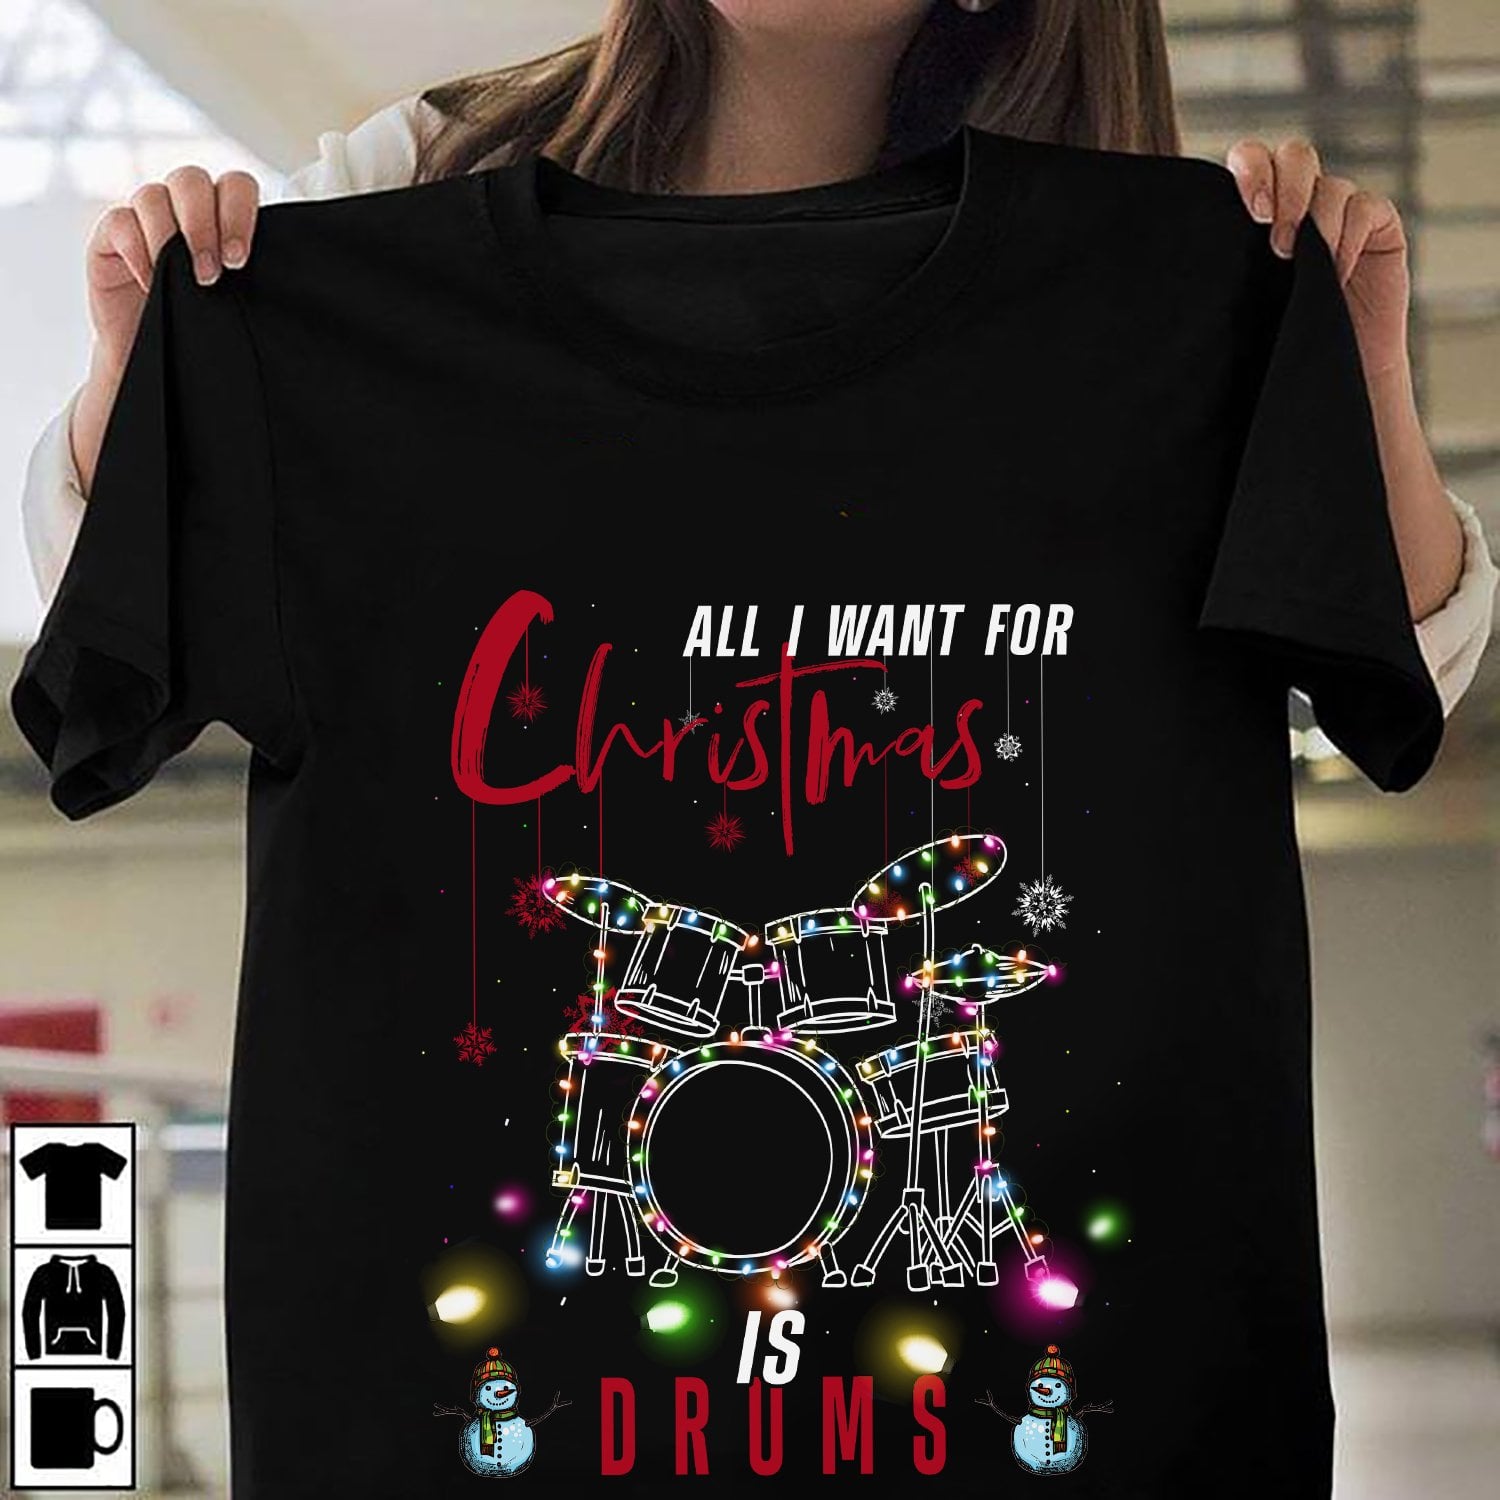 All I want for Christmas is drums - Christmas day ugly sweater, Drum for Christmas day